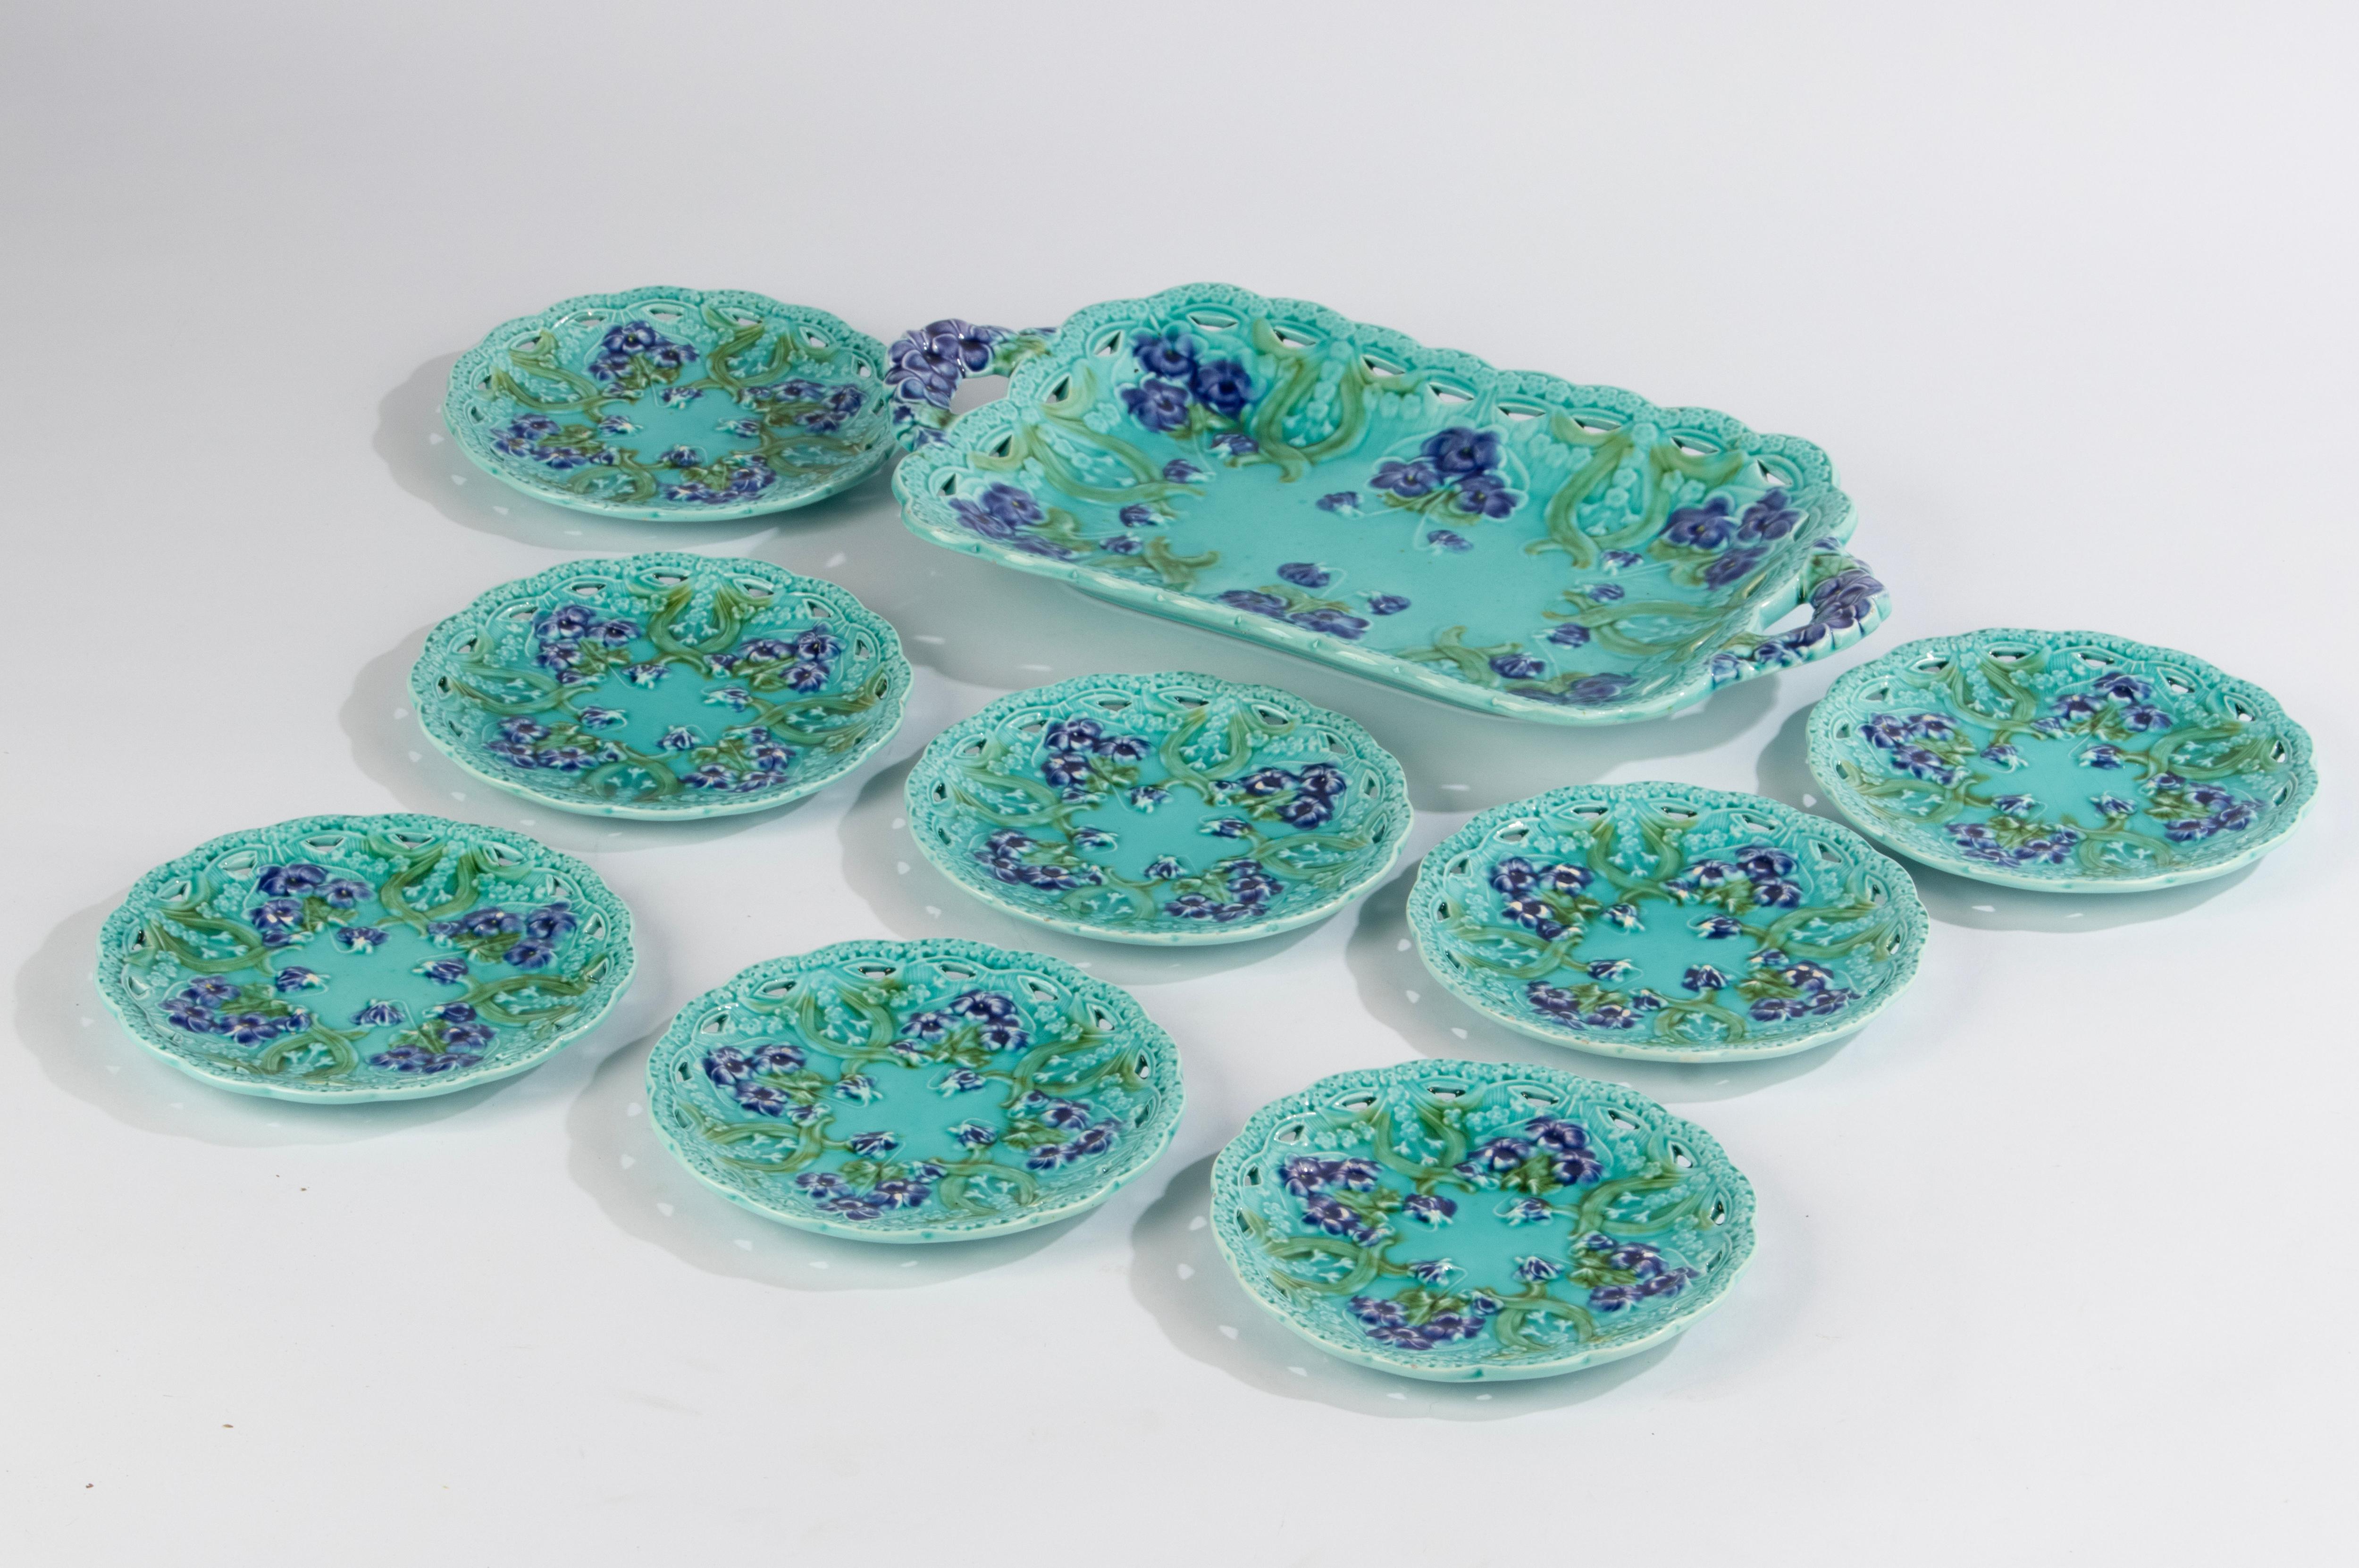 A beautiful majolica ceramic cake set, made by Villeroy & Boch. Nicely decorated in Art Nouveau style. All pieces are marked with a blind mark on the bottom. 
The set is in good condition. No chips and no hairlines. 

Dimensions: Serving tray 38 x